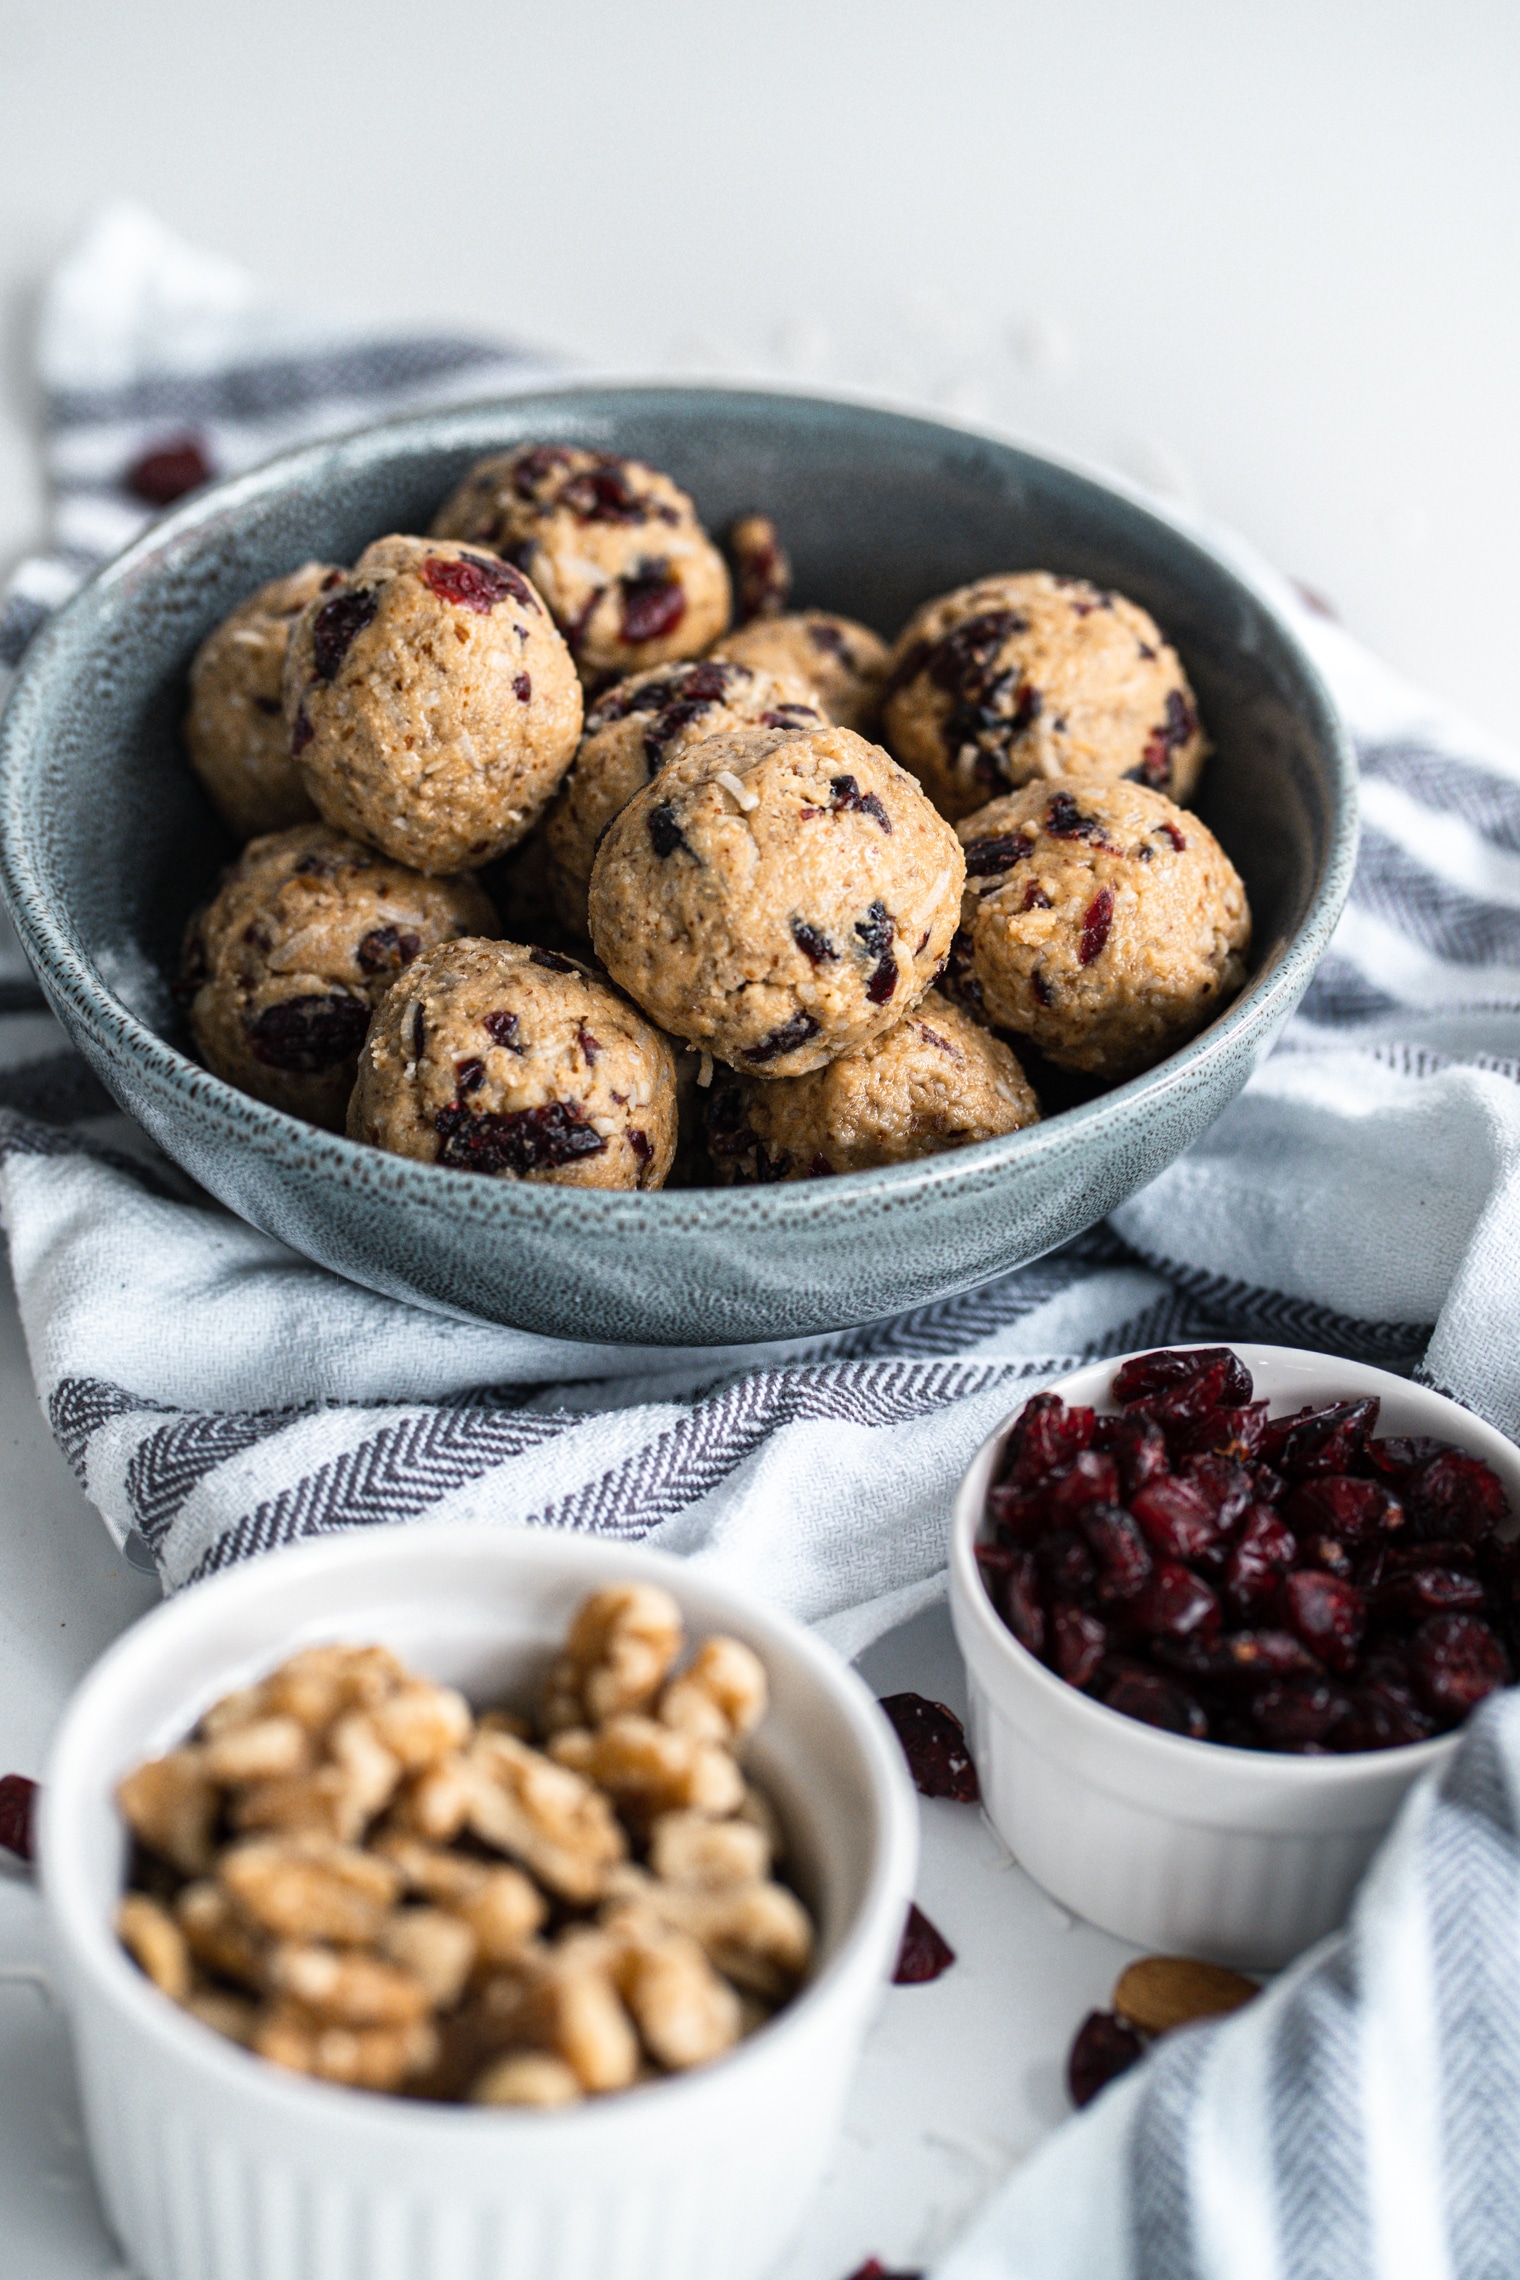 Cranberry Almond Balls in a blue bowl.